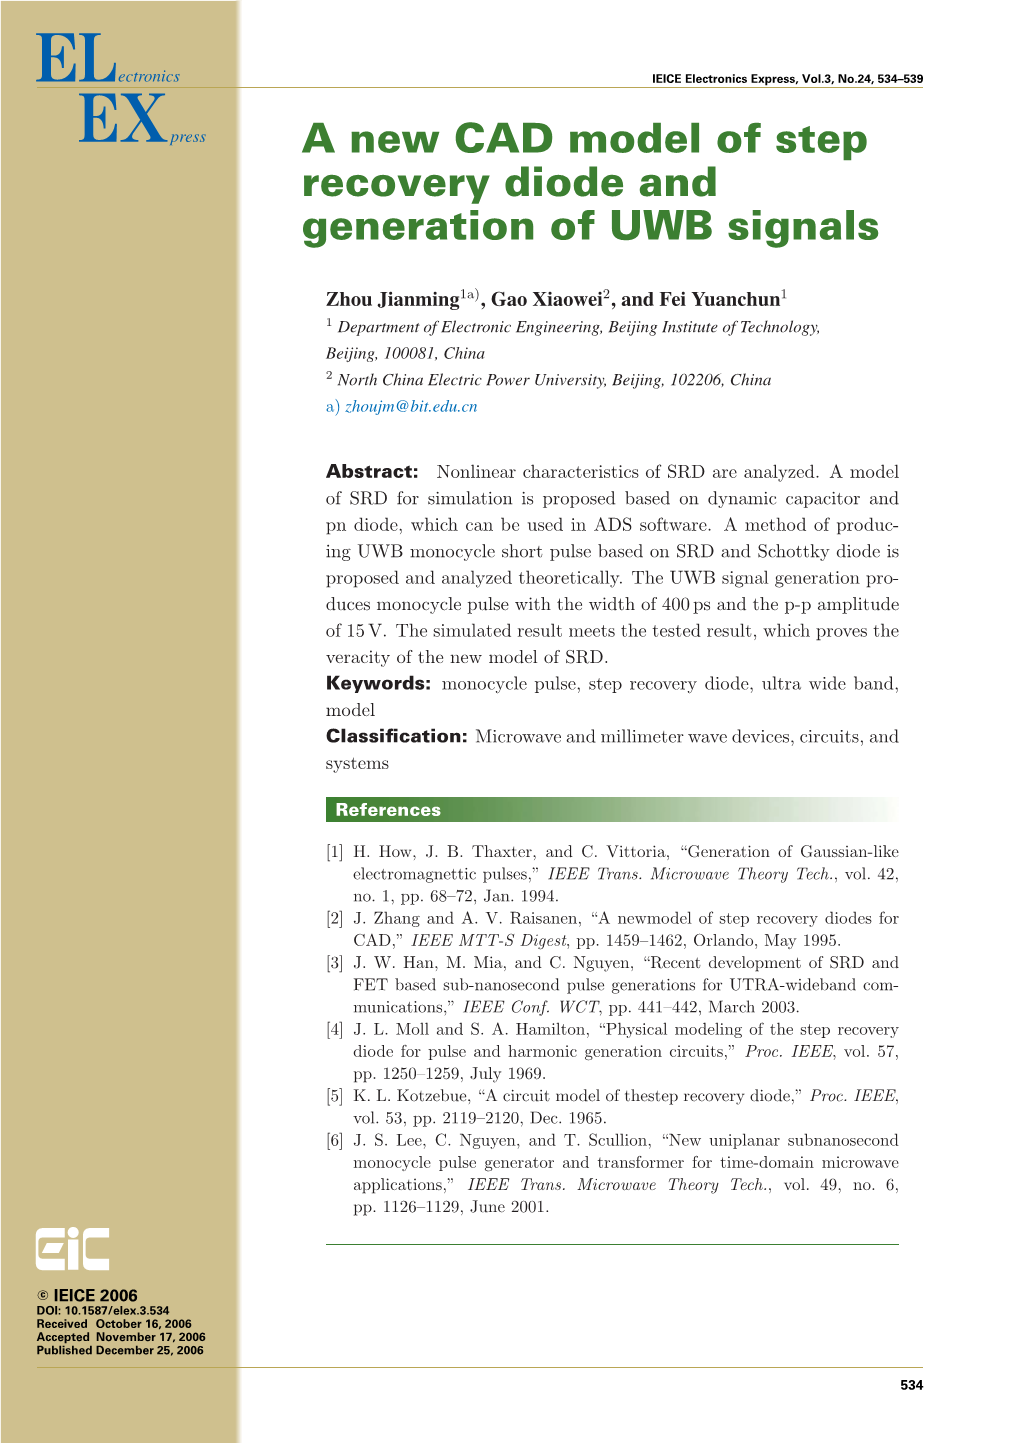 A New CAD Model of Step Recovery Diode and Generation of UWB Signals